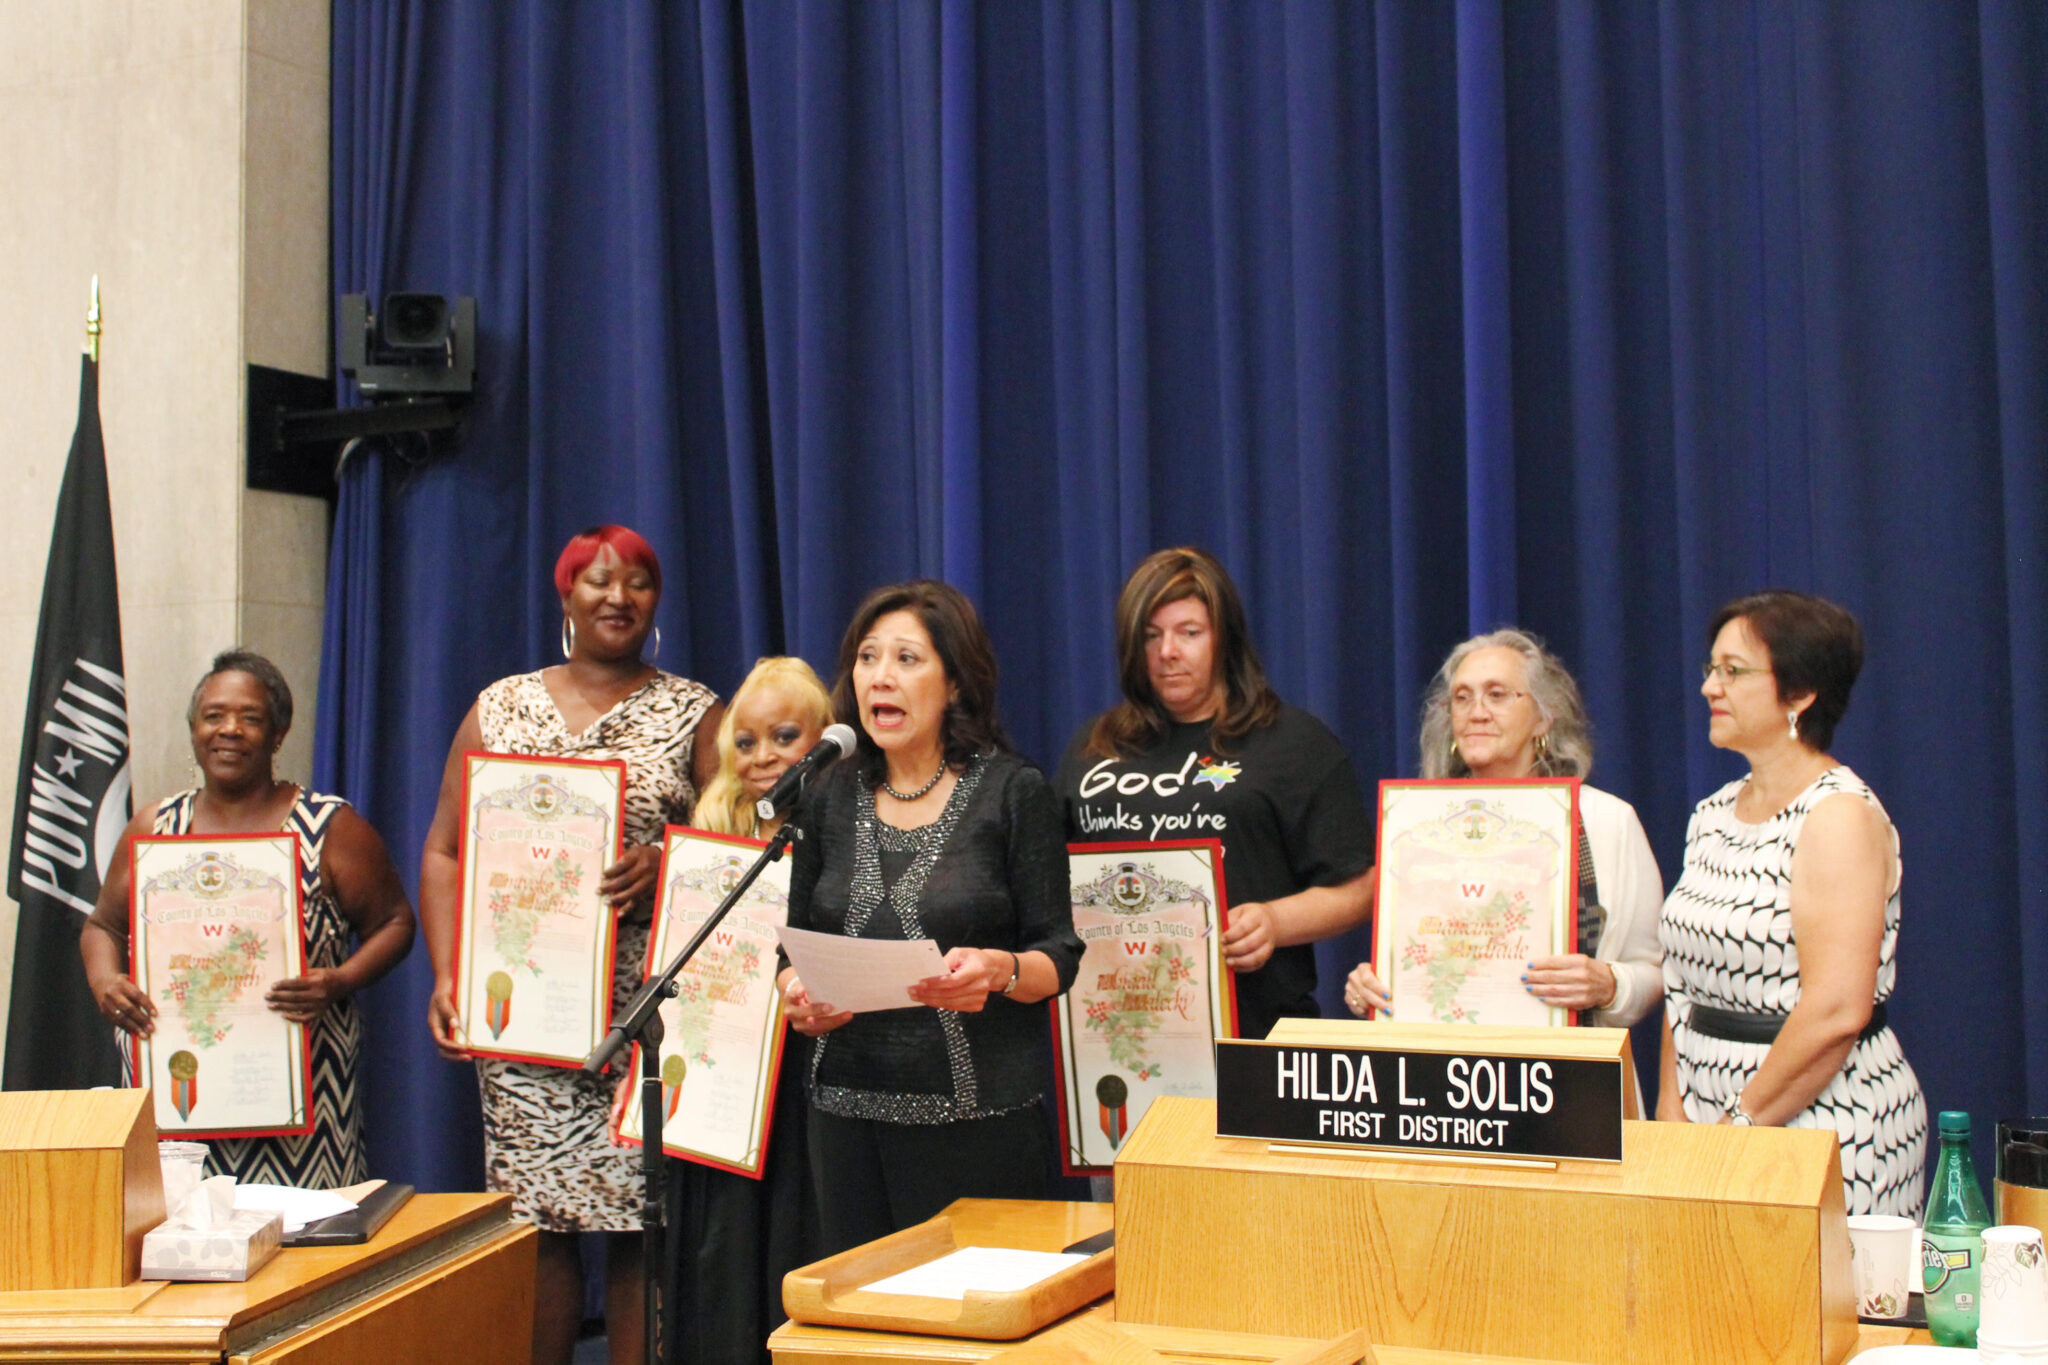 Supervisor Hilda Solis recognizes the advocacy work of each woman. From left to right: Denise Smith, Amiyoko Shabazz, Pamela Walls, Supervisor Solis, Abigail Malecki, Francine Andrade, DWC CEO Anne Miskey 